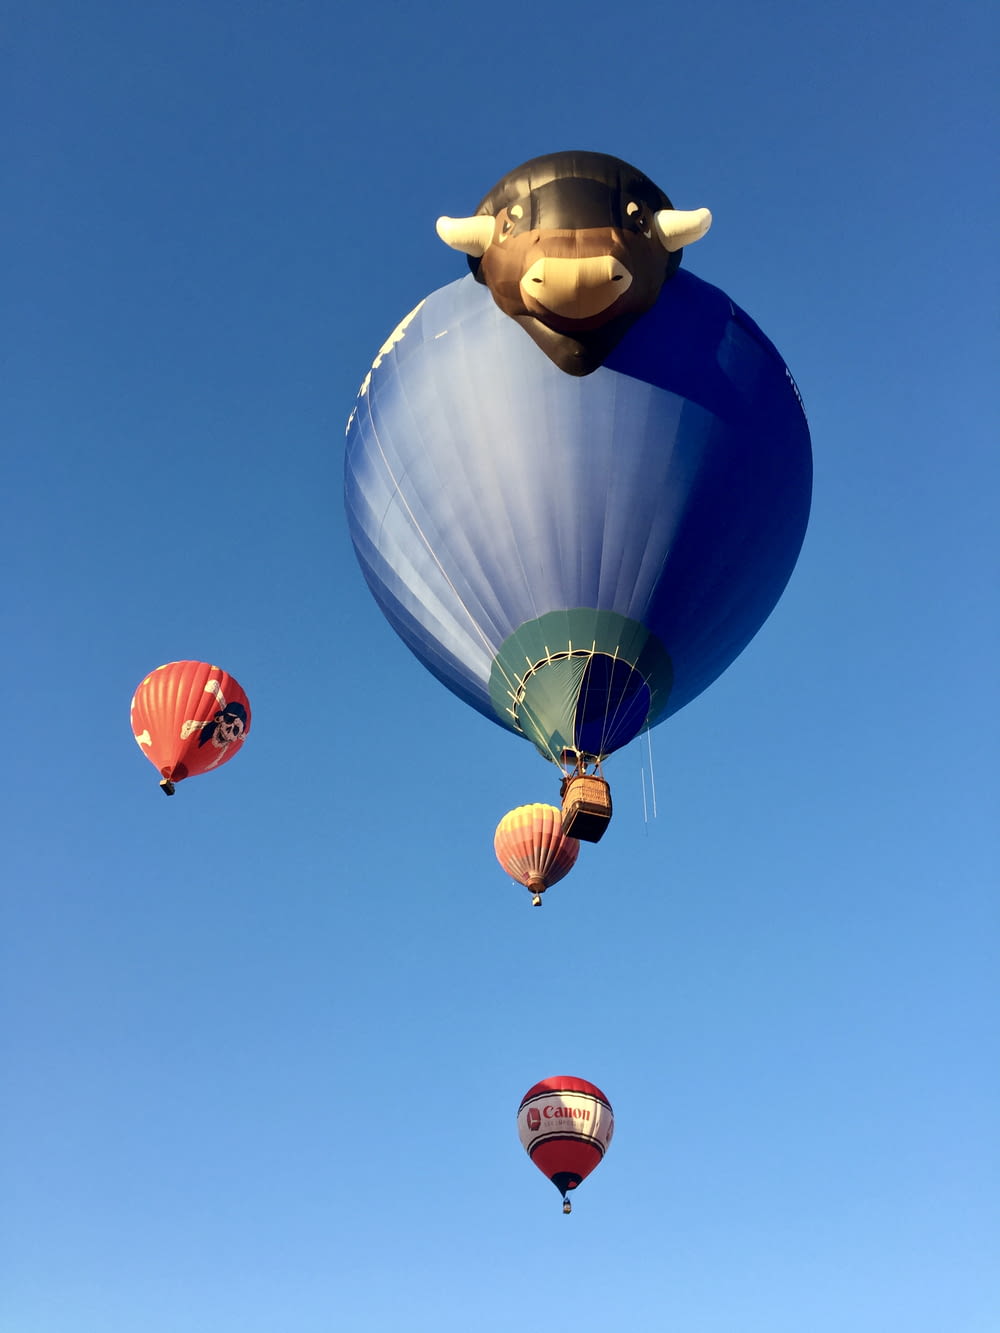 blue red and yellow hot air balloon in mid air under blue sky during daytime